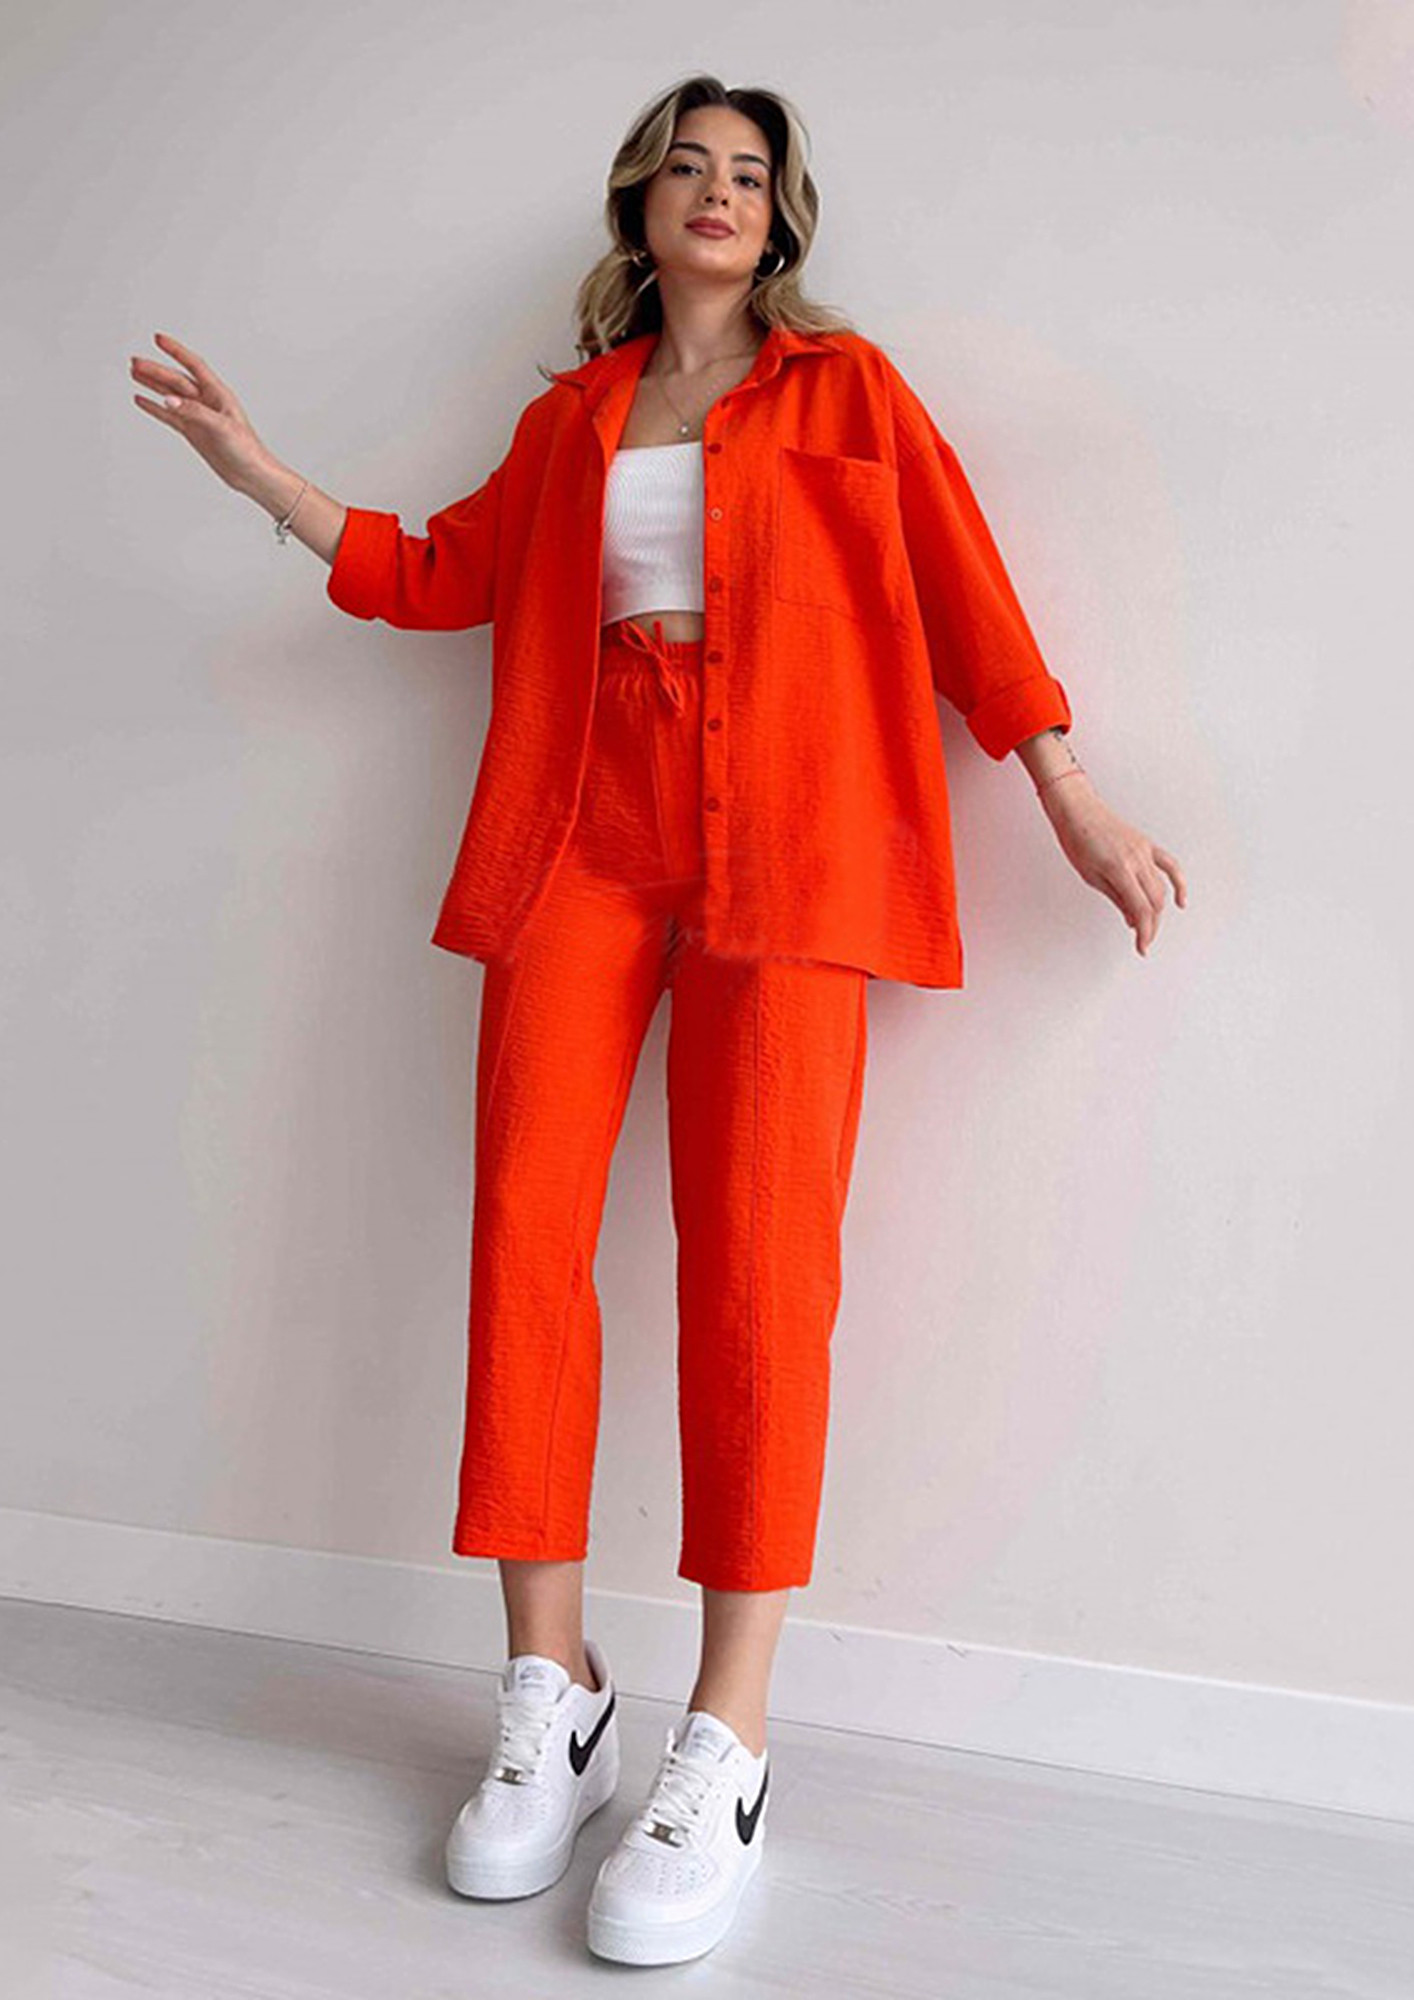 Red Formal Trouser With blazer set Uniform Designs for women Office Pant  Suits | eBay